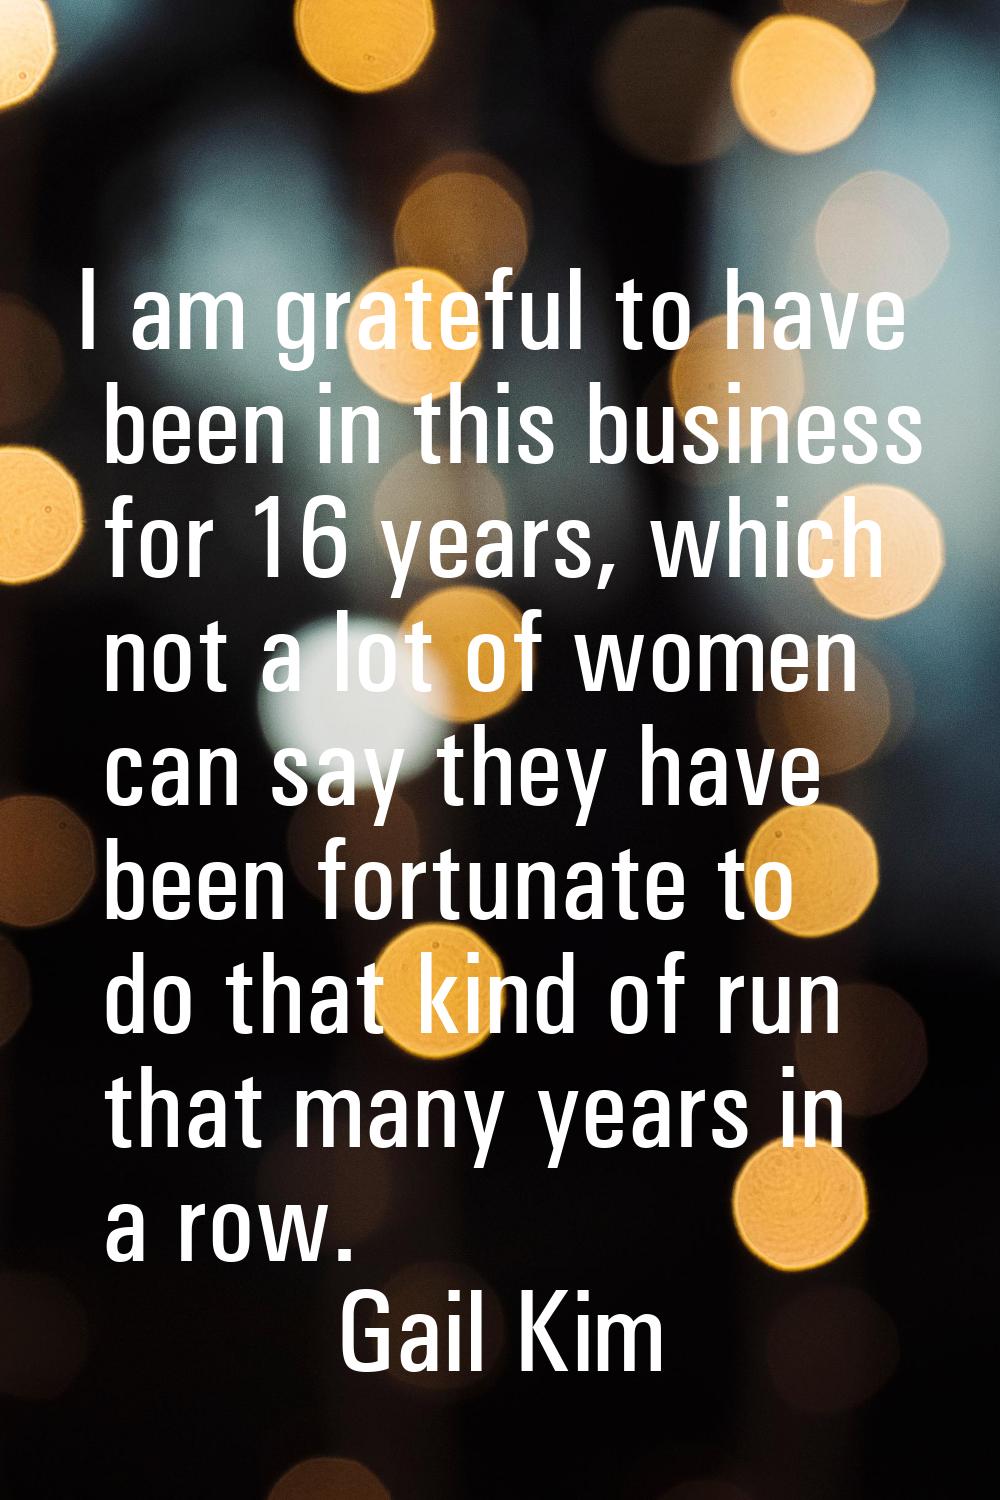 I am grateful to have been in this business for 16 years, which not a lot of women can say they hav